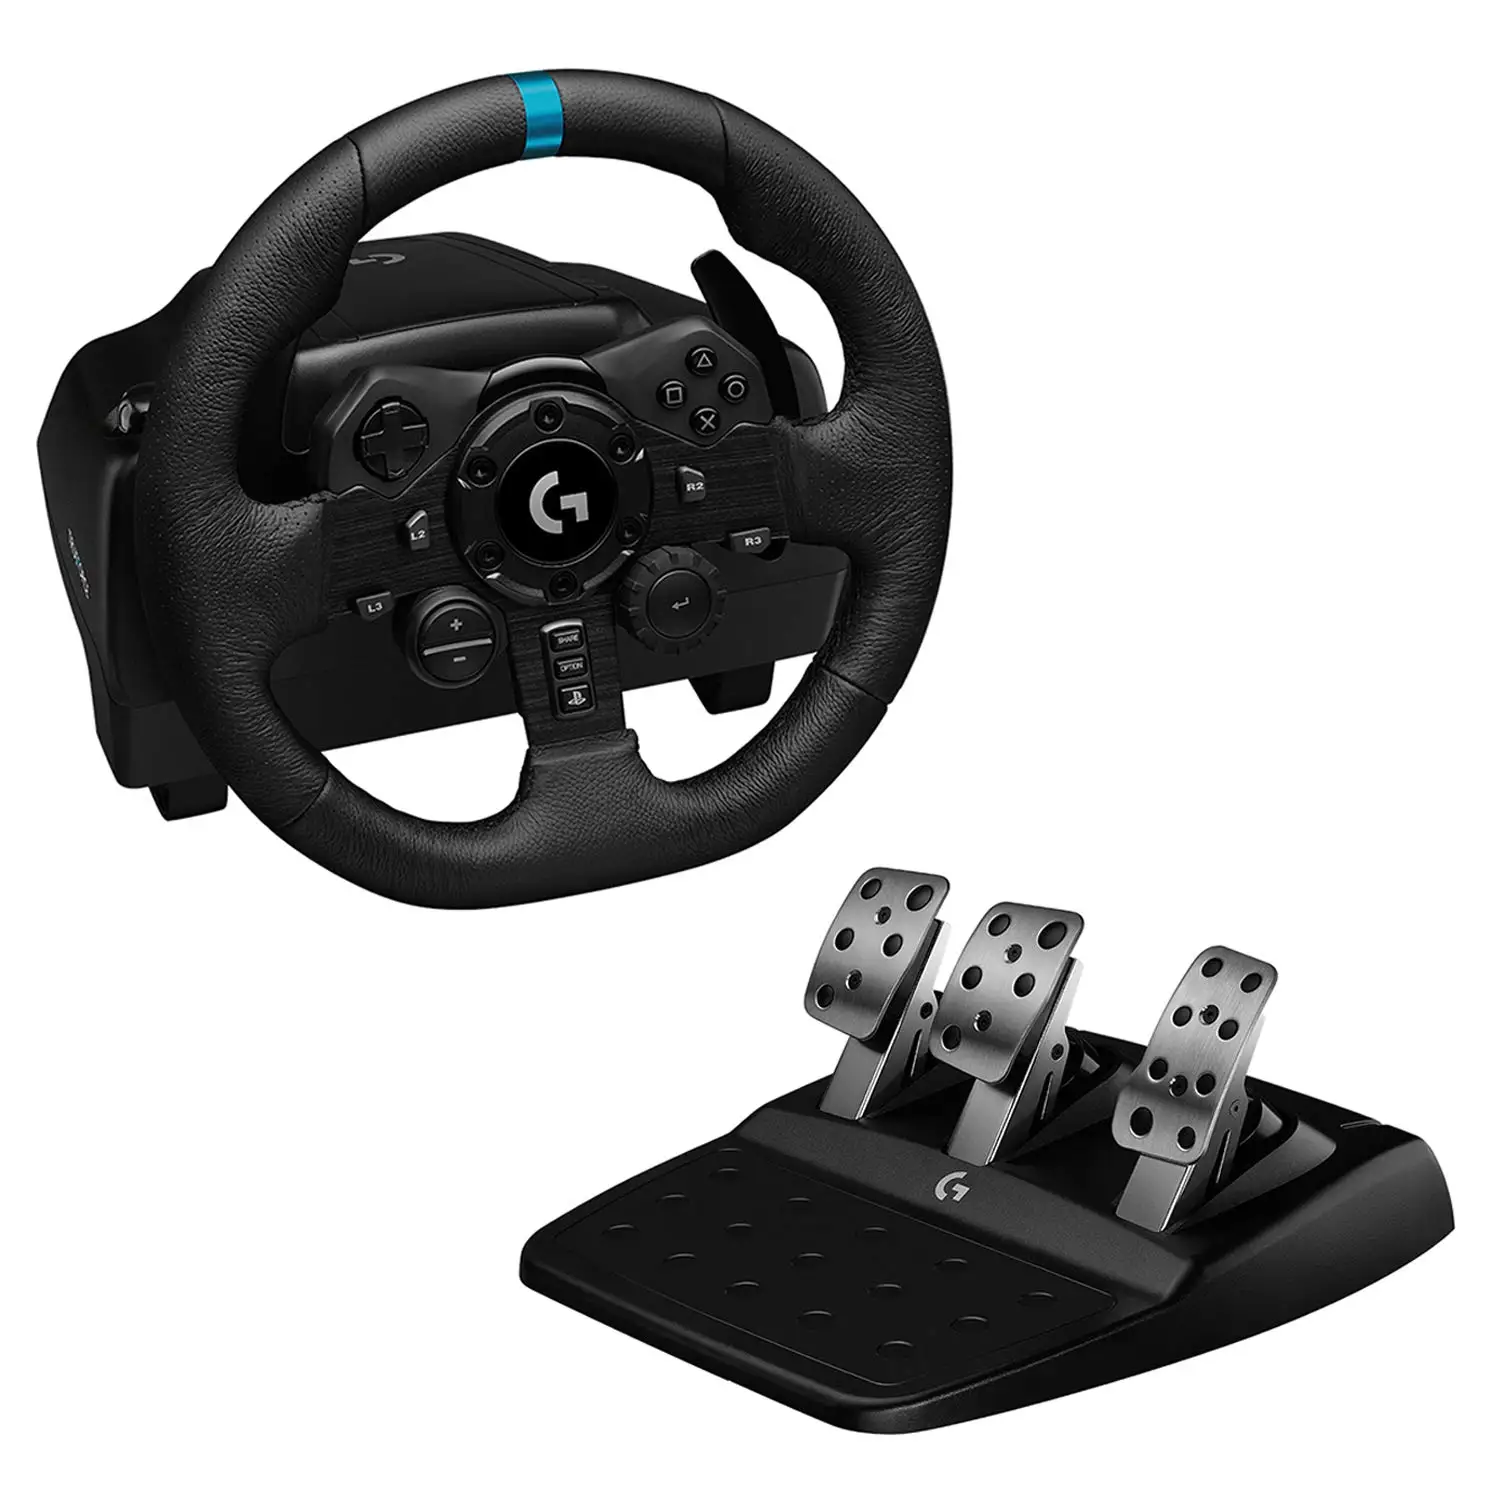 

Log itech Racing Wheel and Pedals for PS 5, PS4 and PC featuring up to 1000 Hz Force Feedback, Responsive Pedal, Dual Clutch Lau